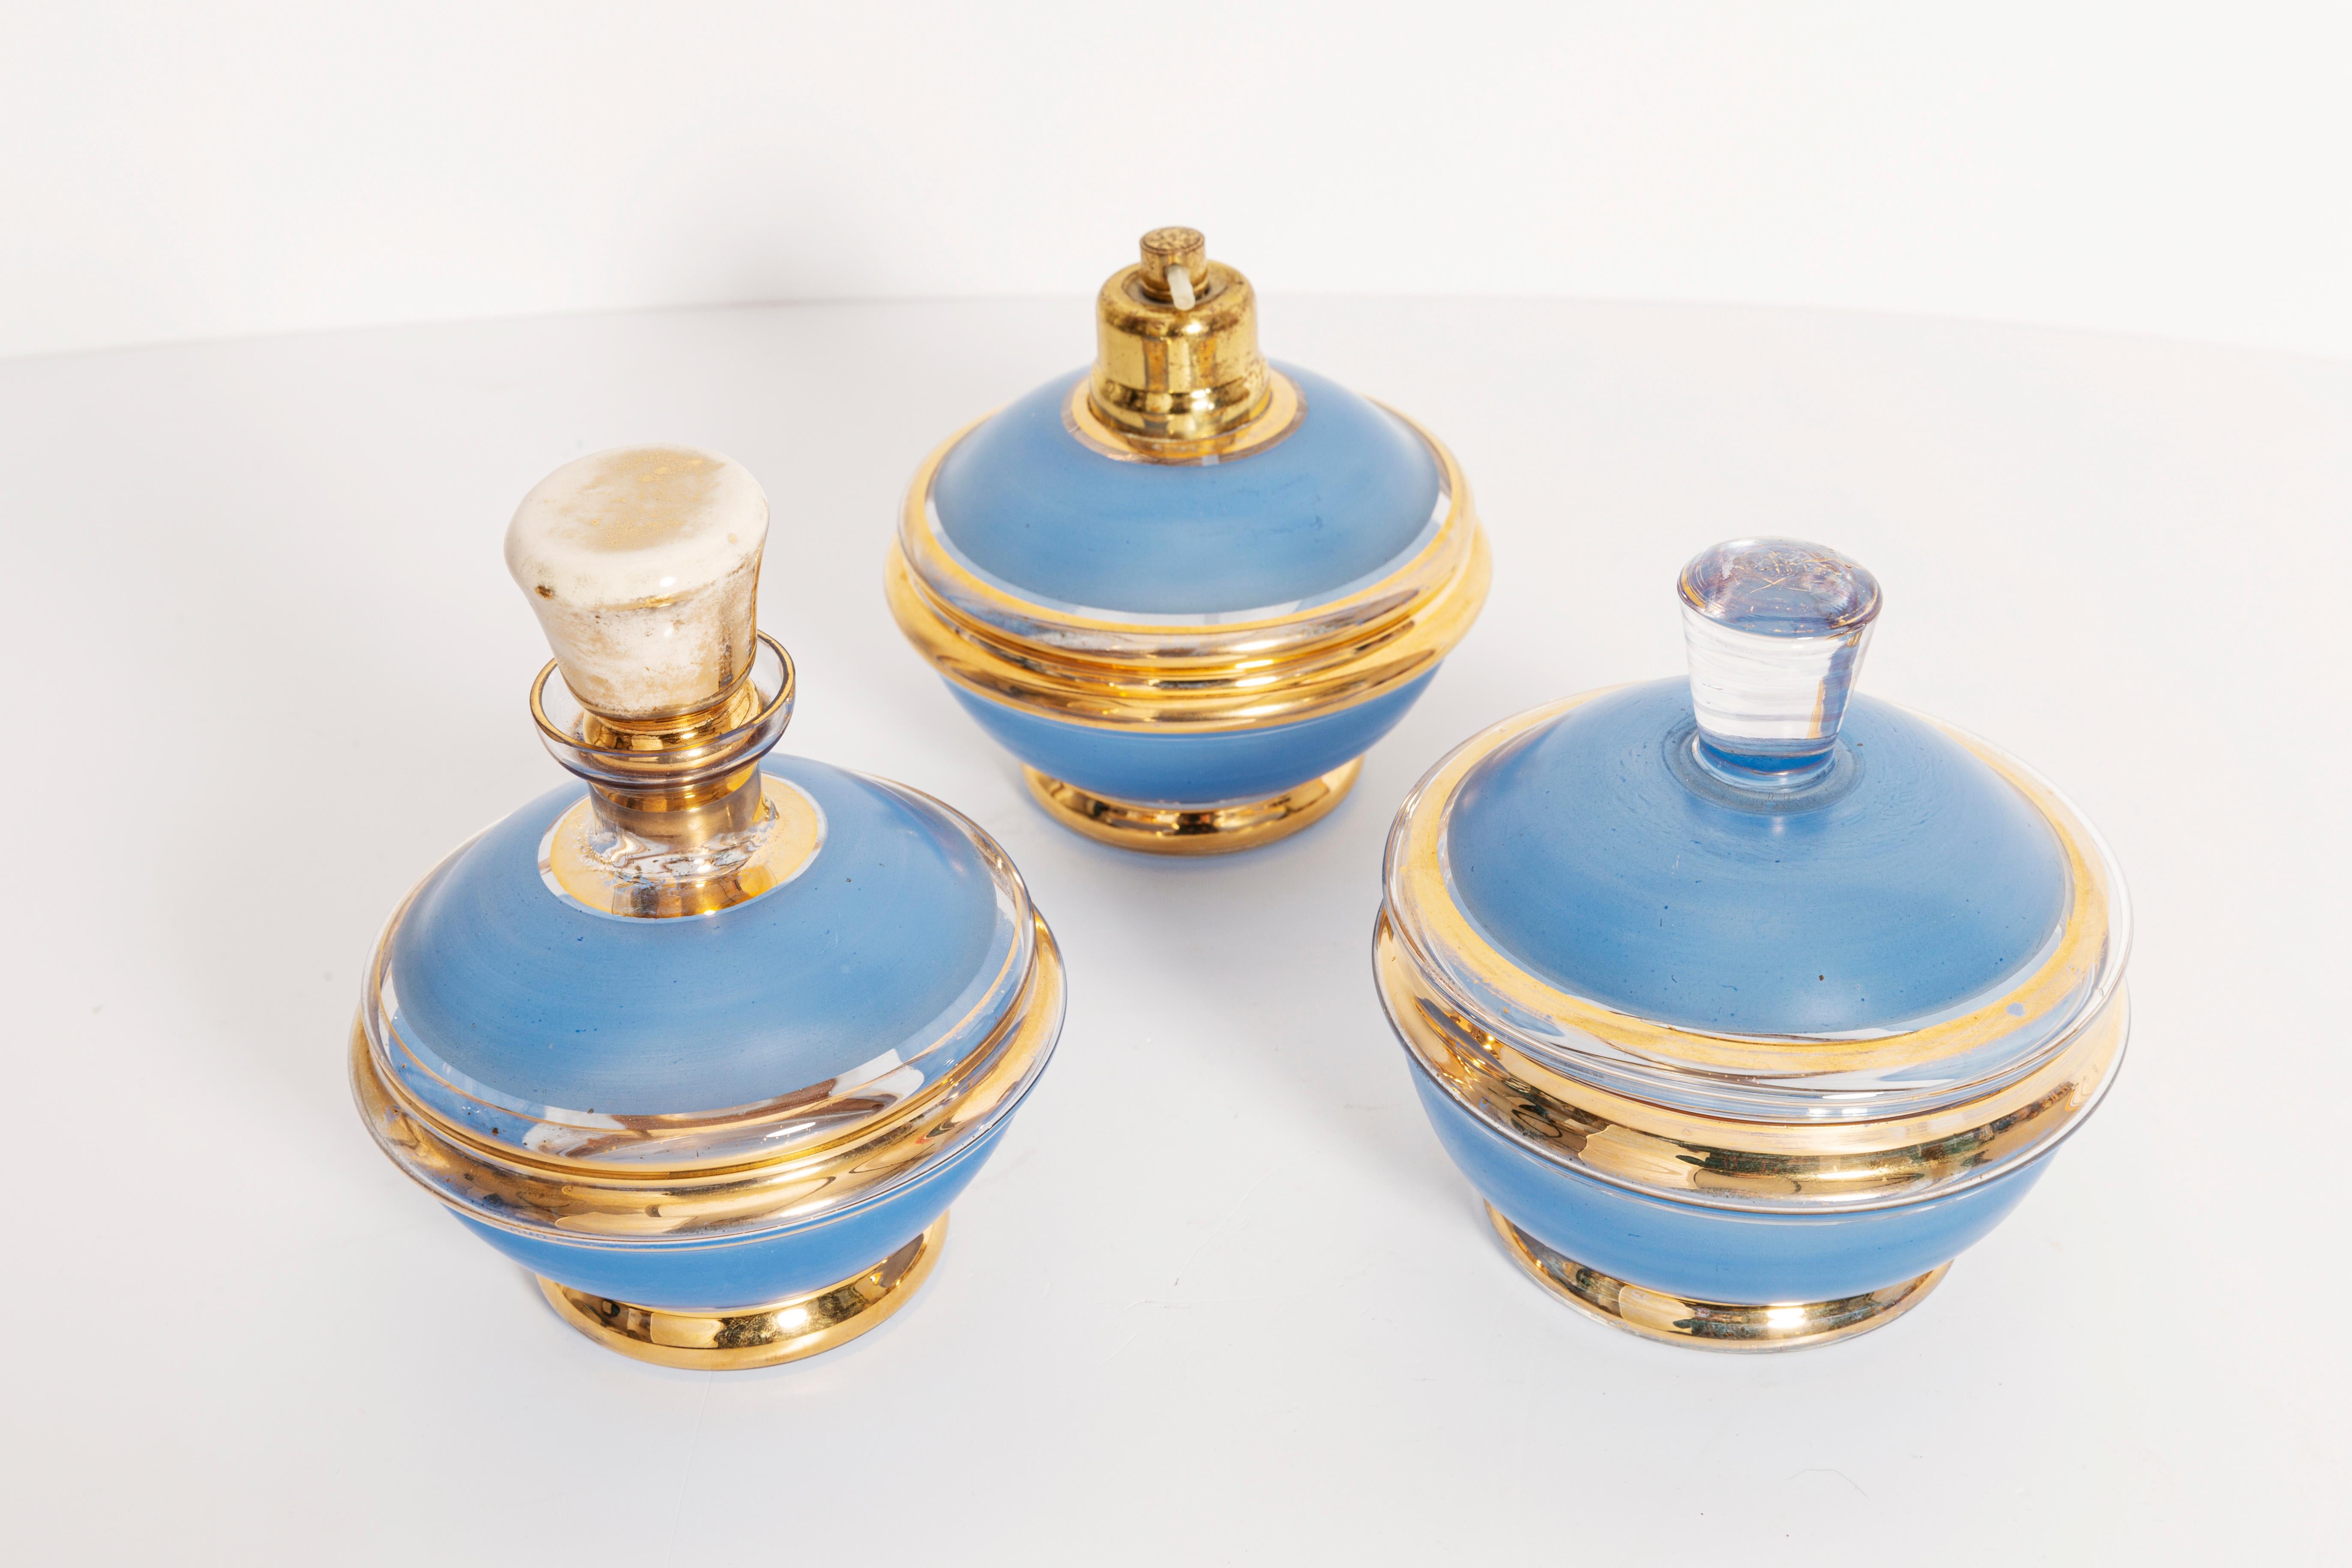 This beautiful baby blue bathroom set is in very good vintage condition. An elegant addition to a Classic bathroom. Only one unique set. Made in France in 1960s.